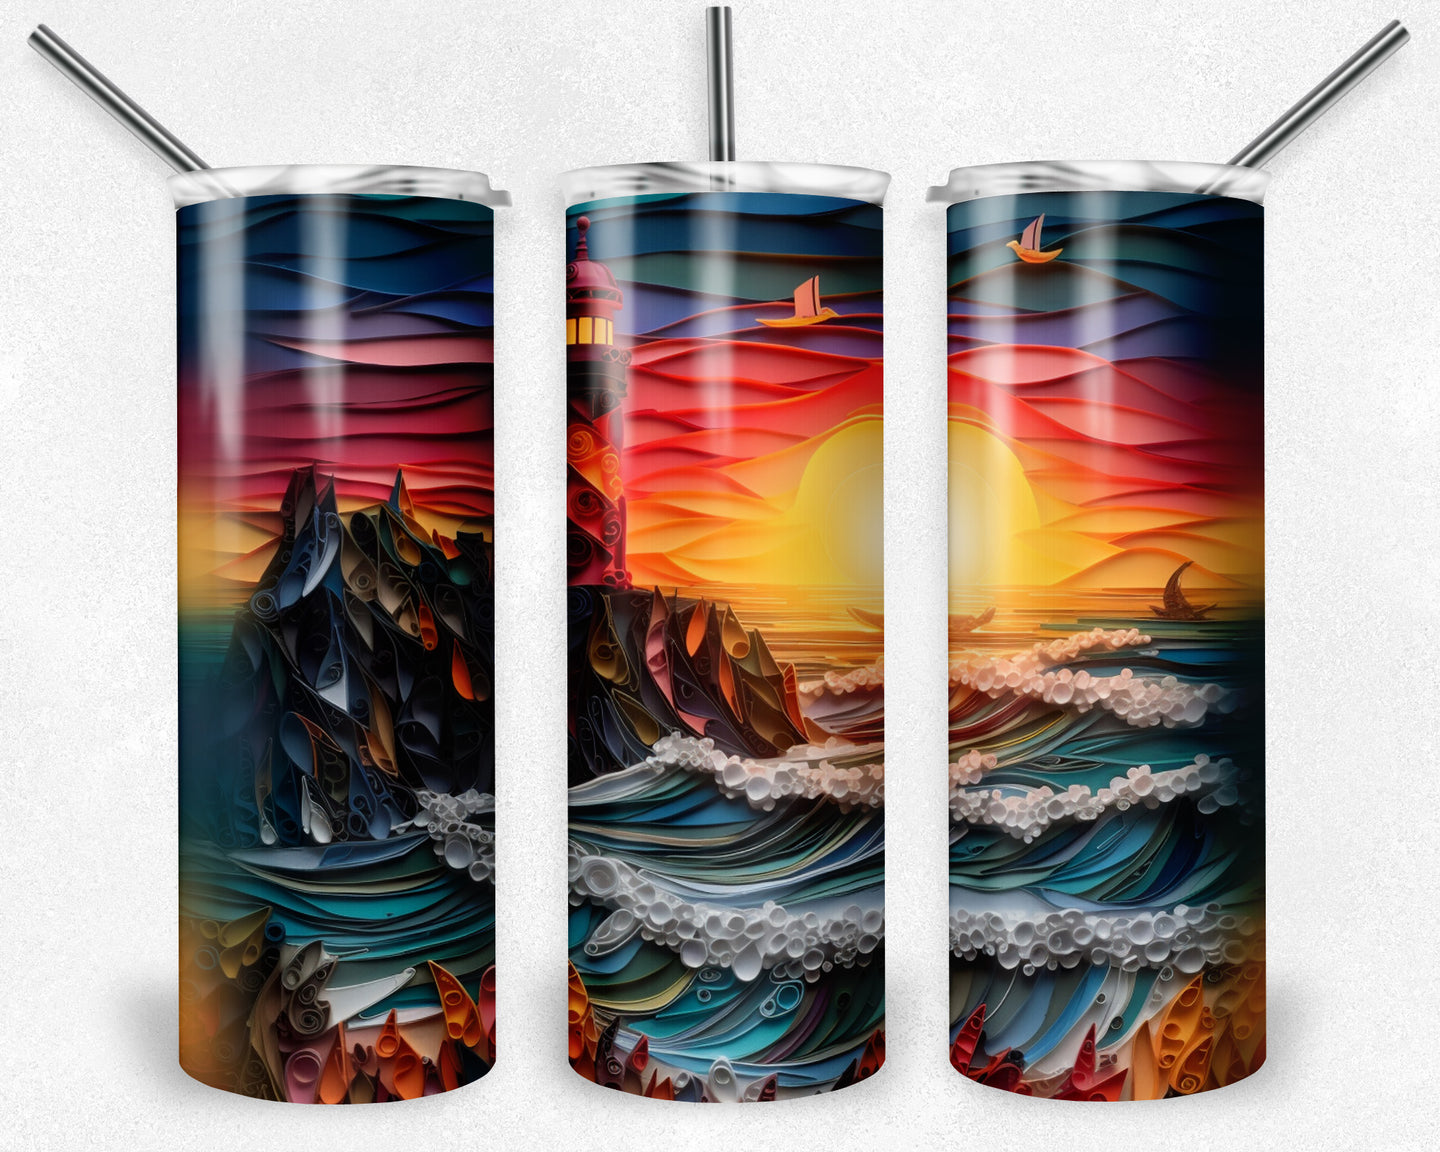 Lighthouse and Bright Sunset - quilled design